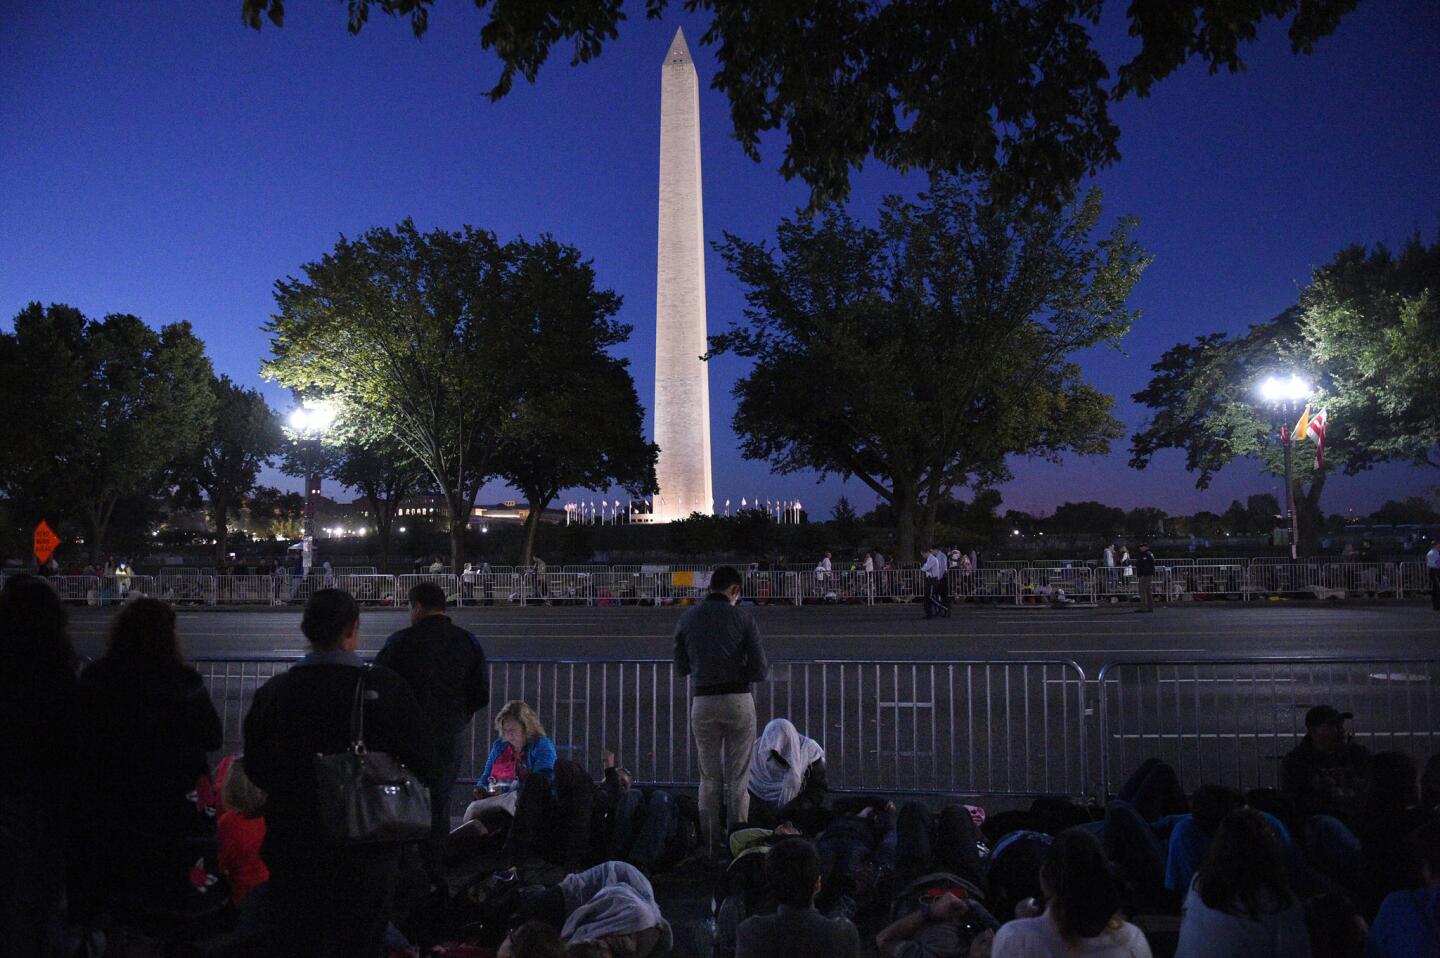 Spectators wait as early as 5 a.m. along the parade route of Pope Francis around the Ellipse, south of the White House, on Sept. 23, 2015.